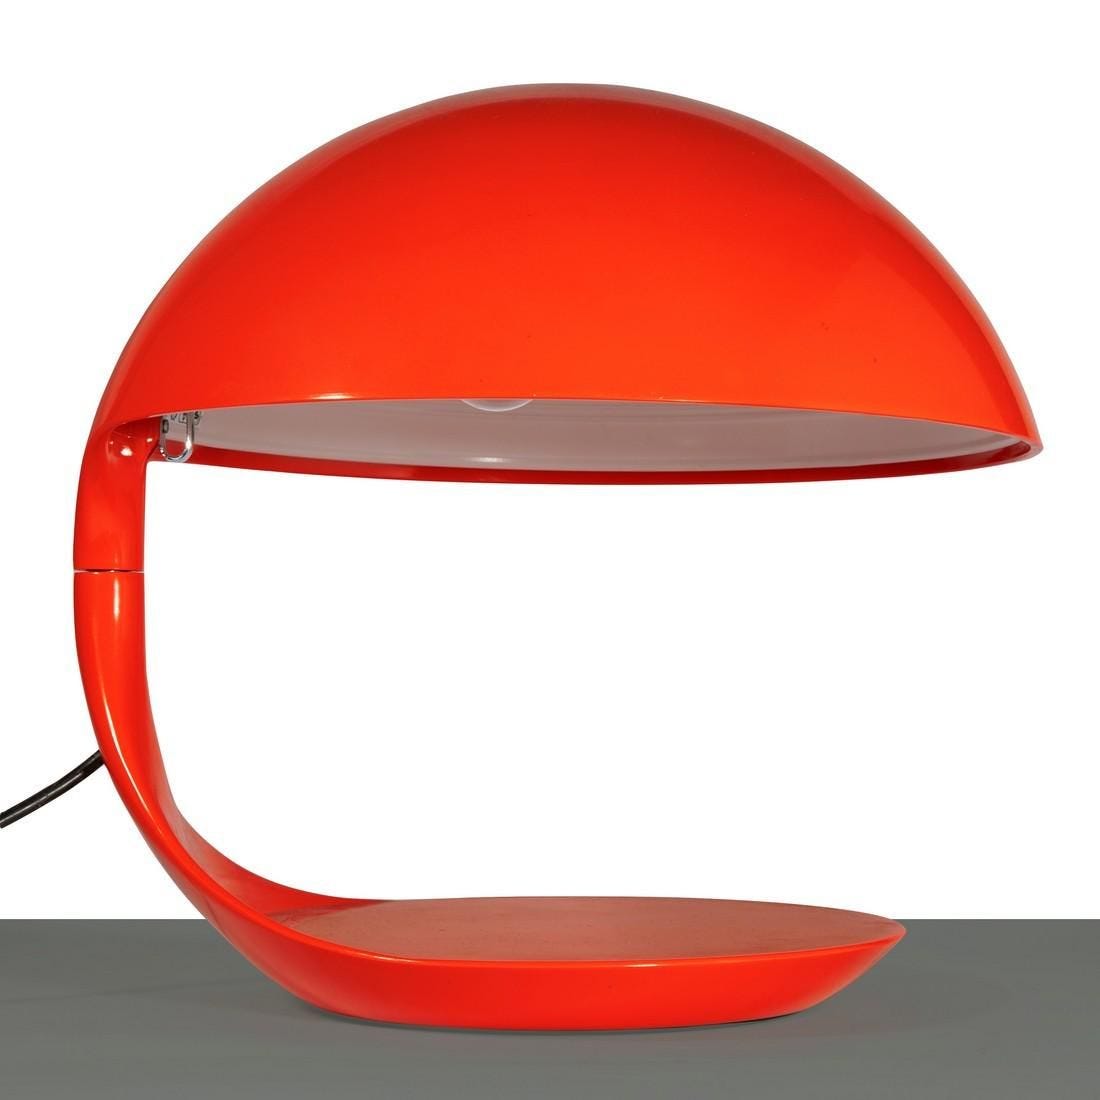 Martinelli Luce (Lucca 1950) - Red Cobra table lamp, 60's